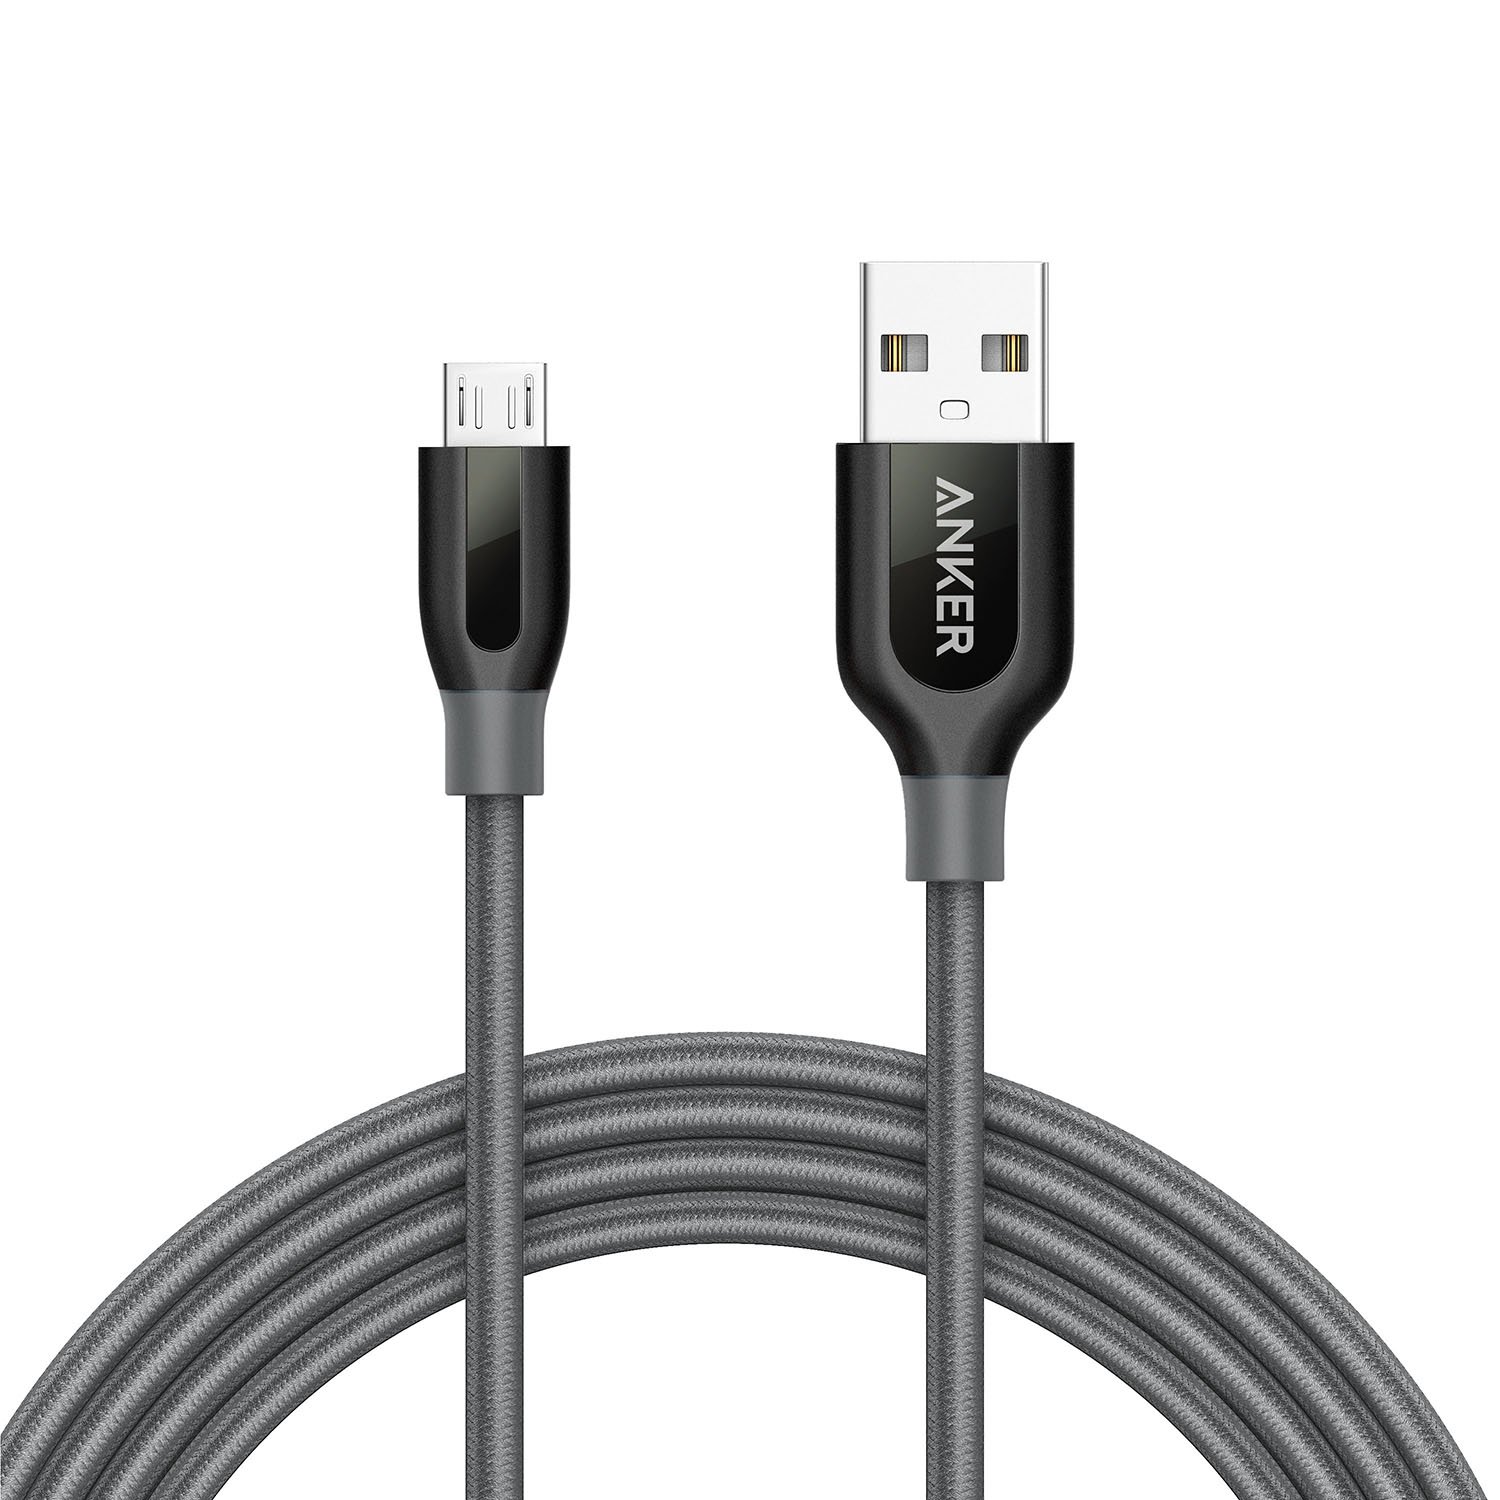 Book Cover Anker Powerline+ Micro USB (6ft) The Premium Durable Cable [Double Braided Nylon] for Samsung, Nexus, LG, Motorola, Android Smartphones and More (Gray) 6 feet Gray